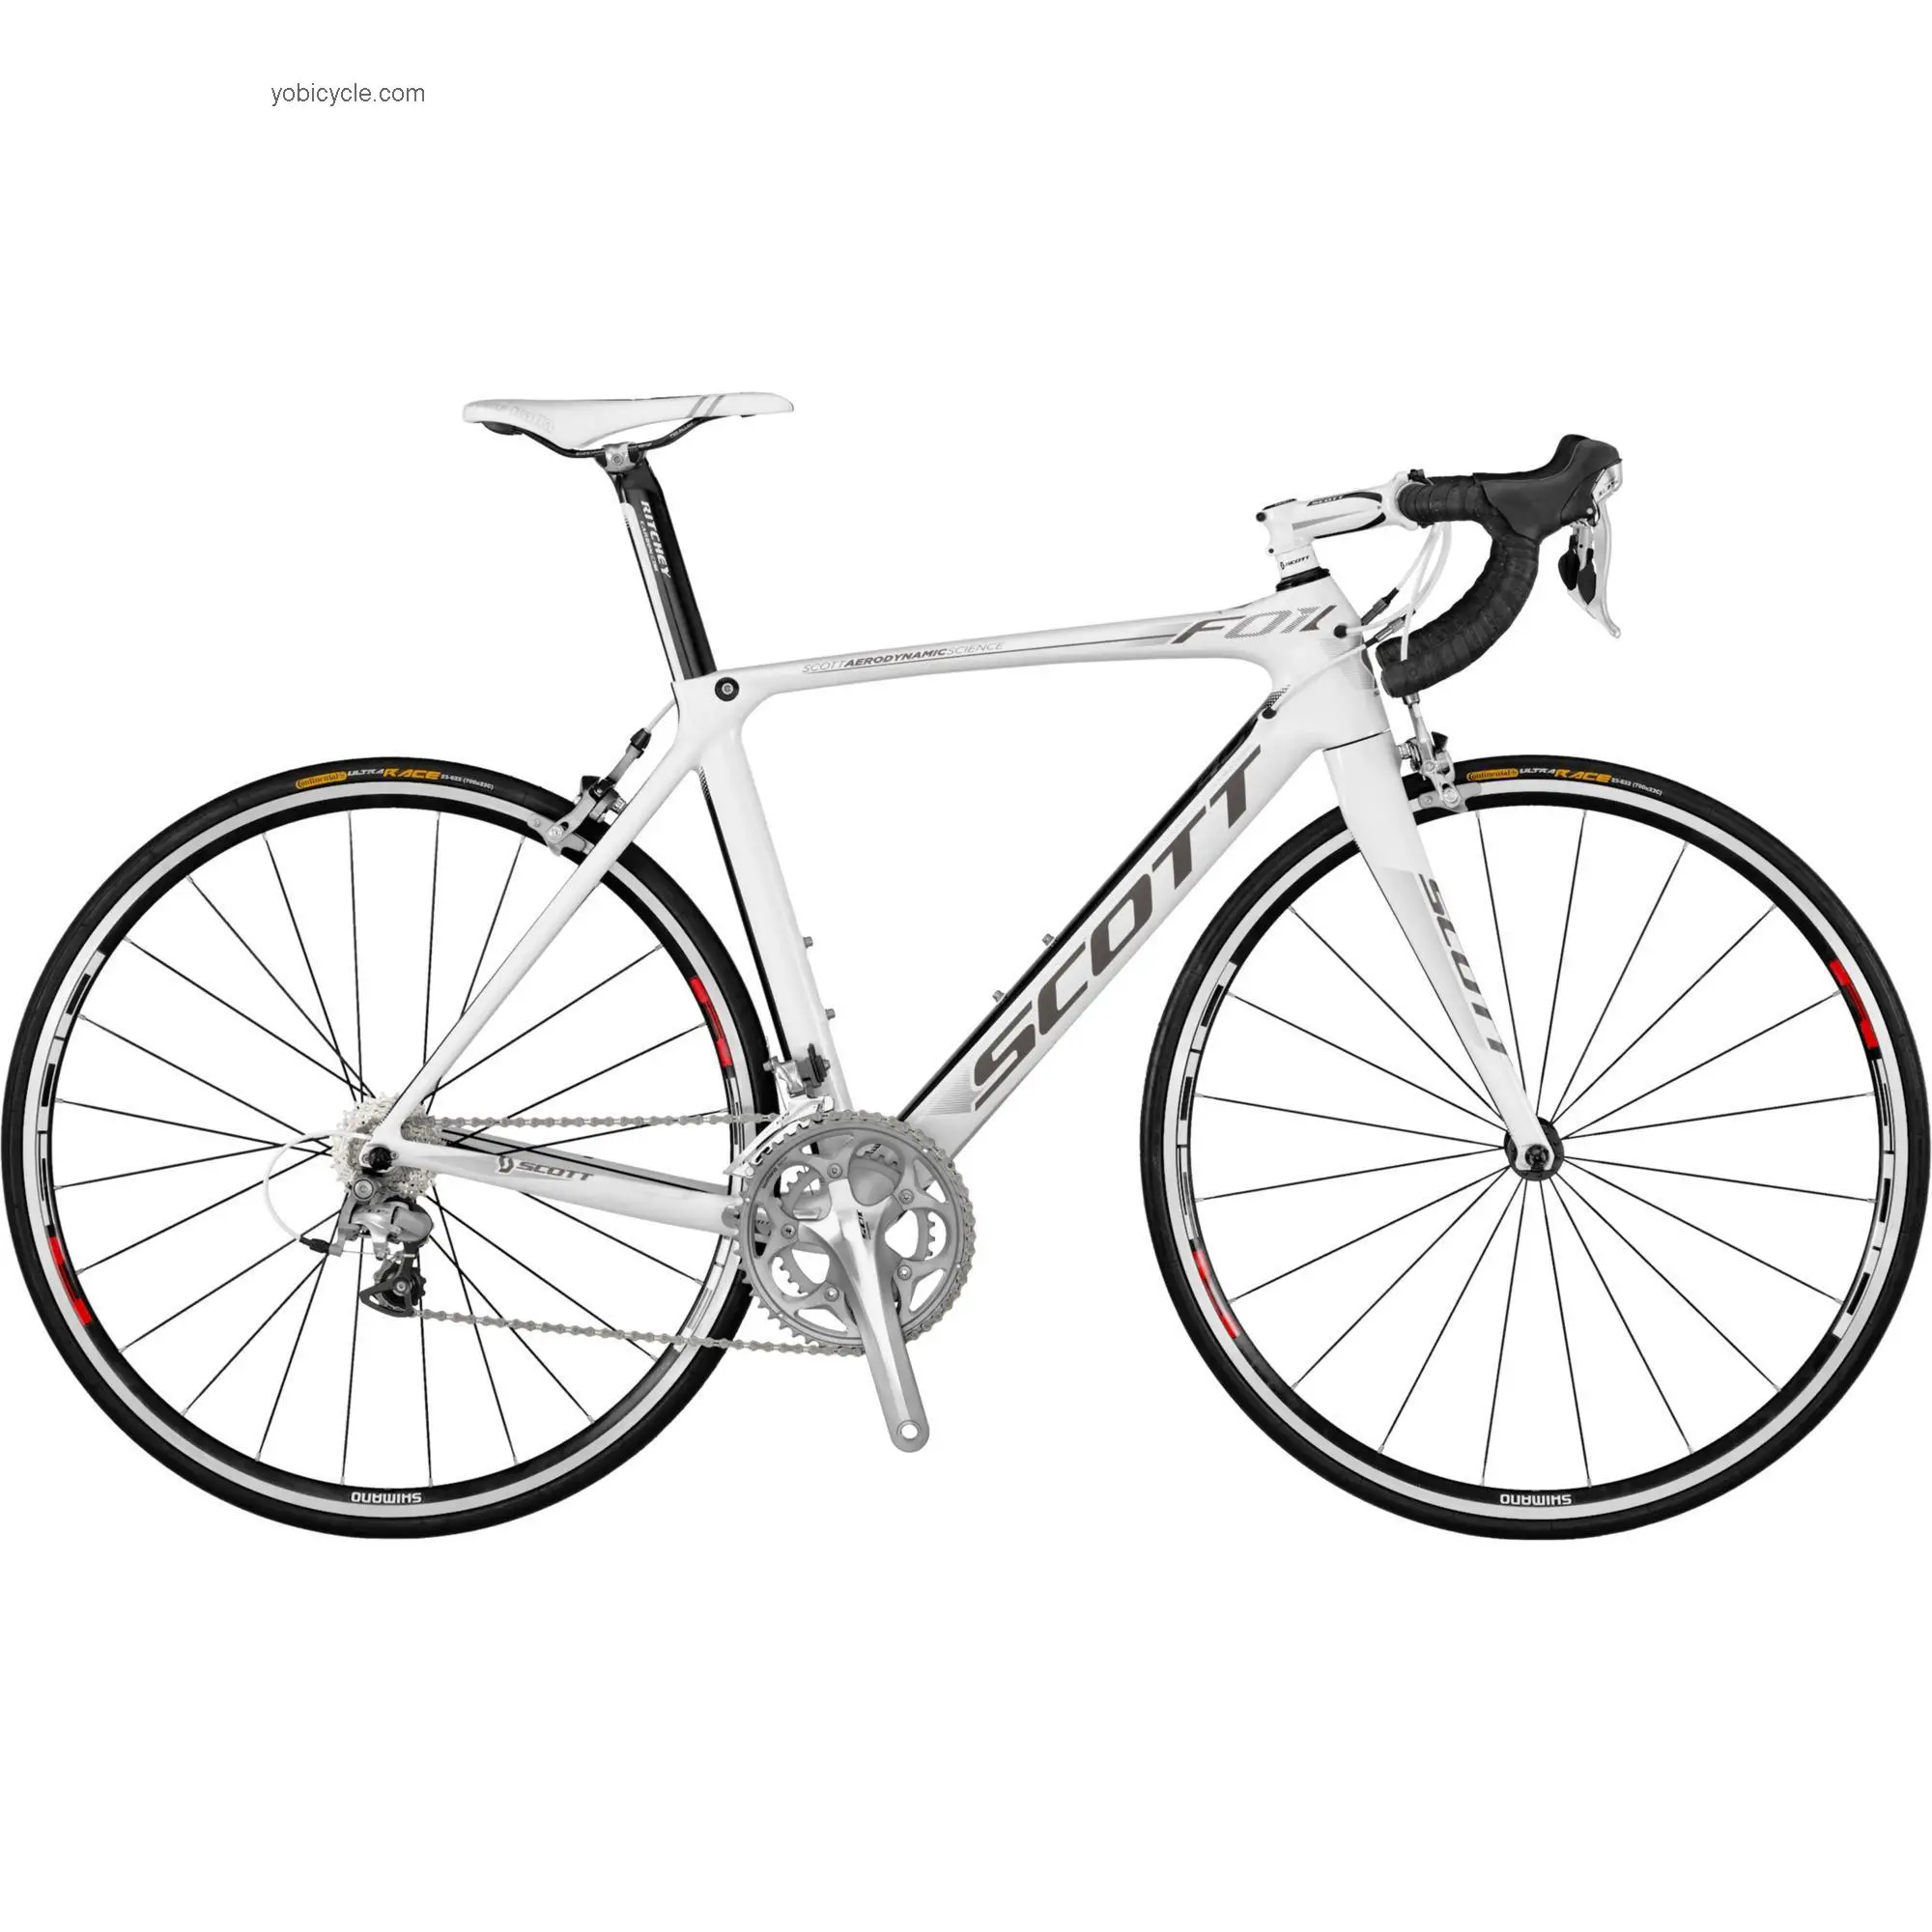 Scott  Foil 40 Technical data and specifications